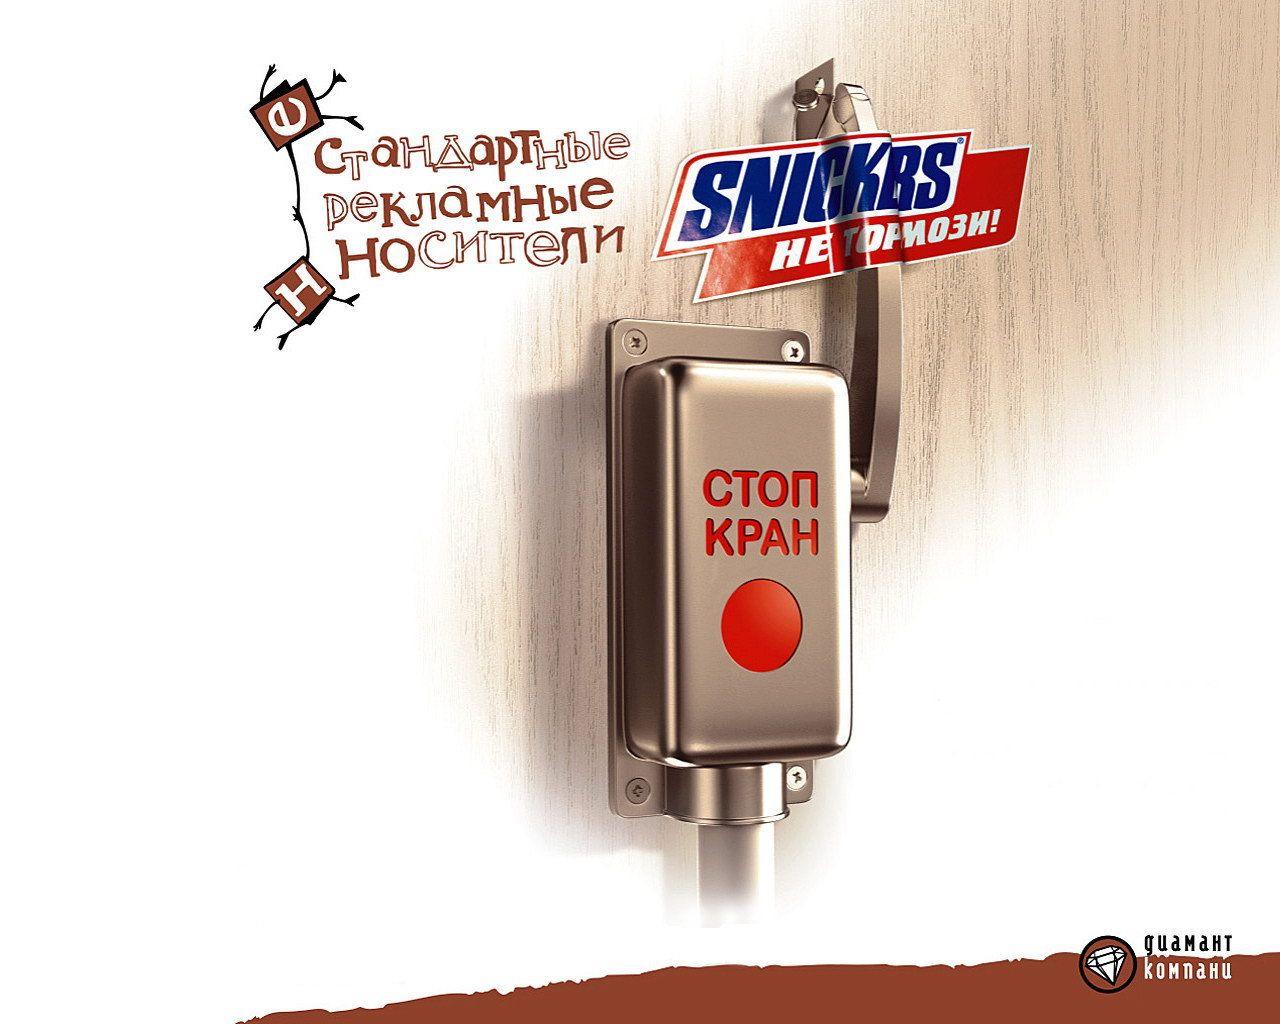 Snickers, don't stop wallpaper and image, picture